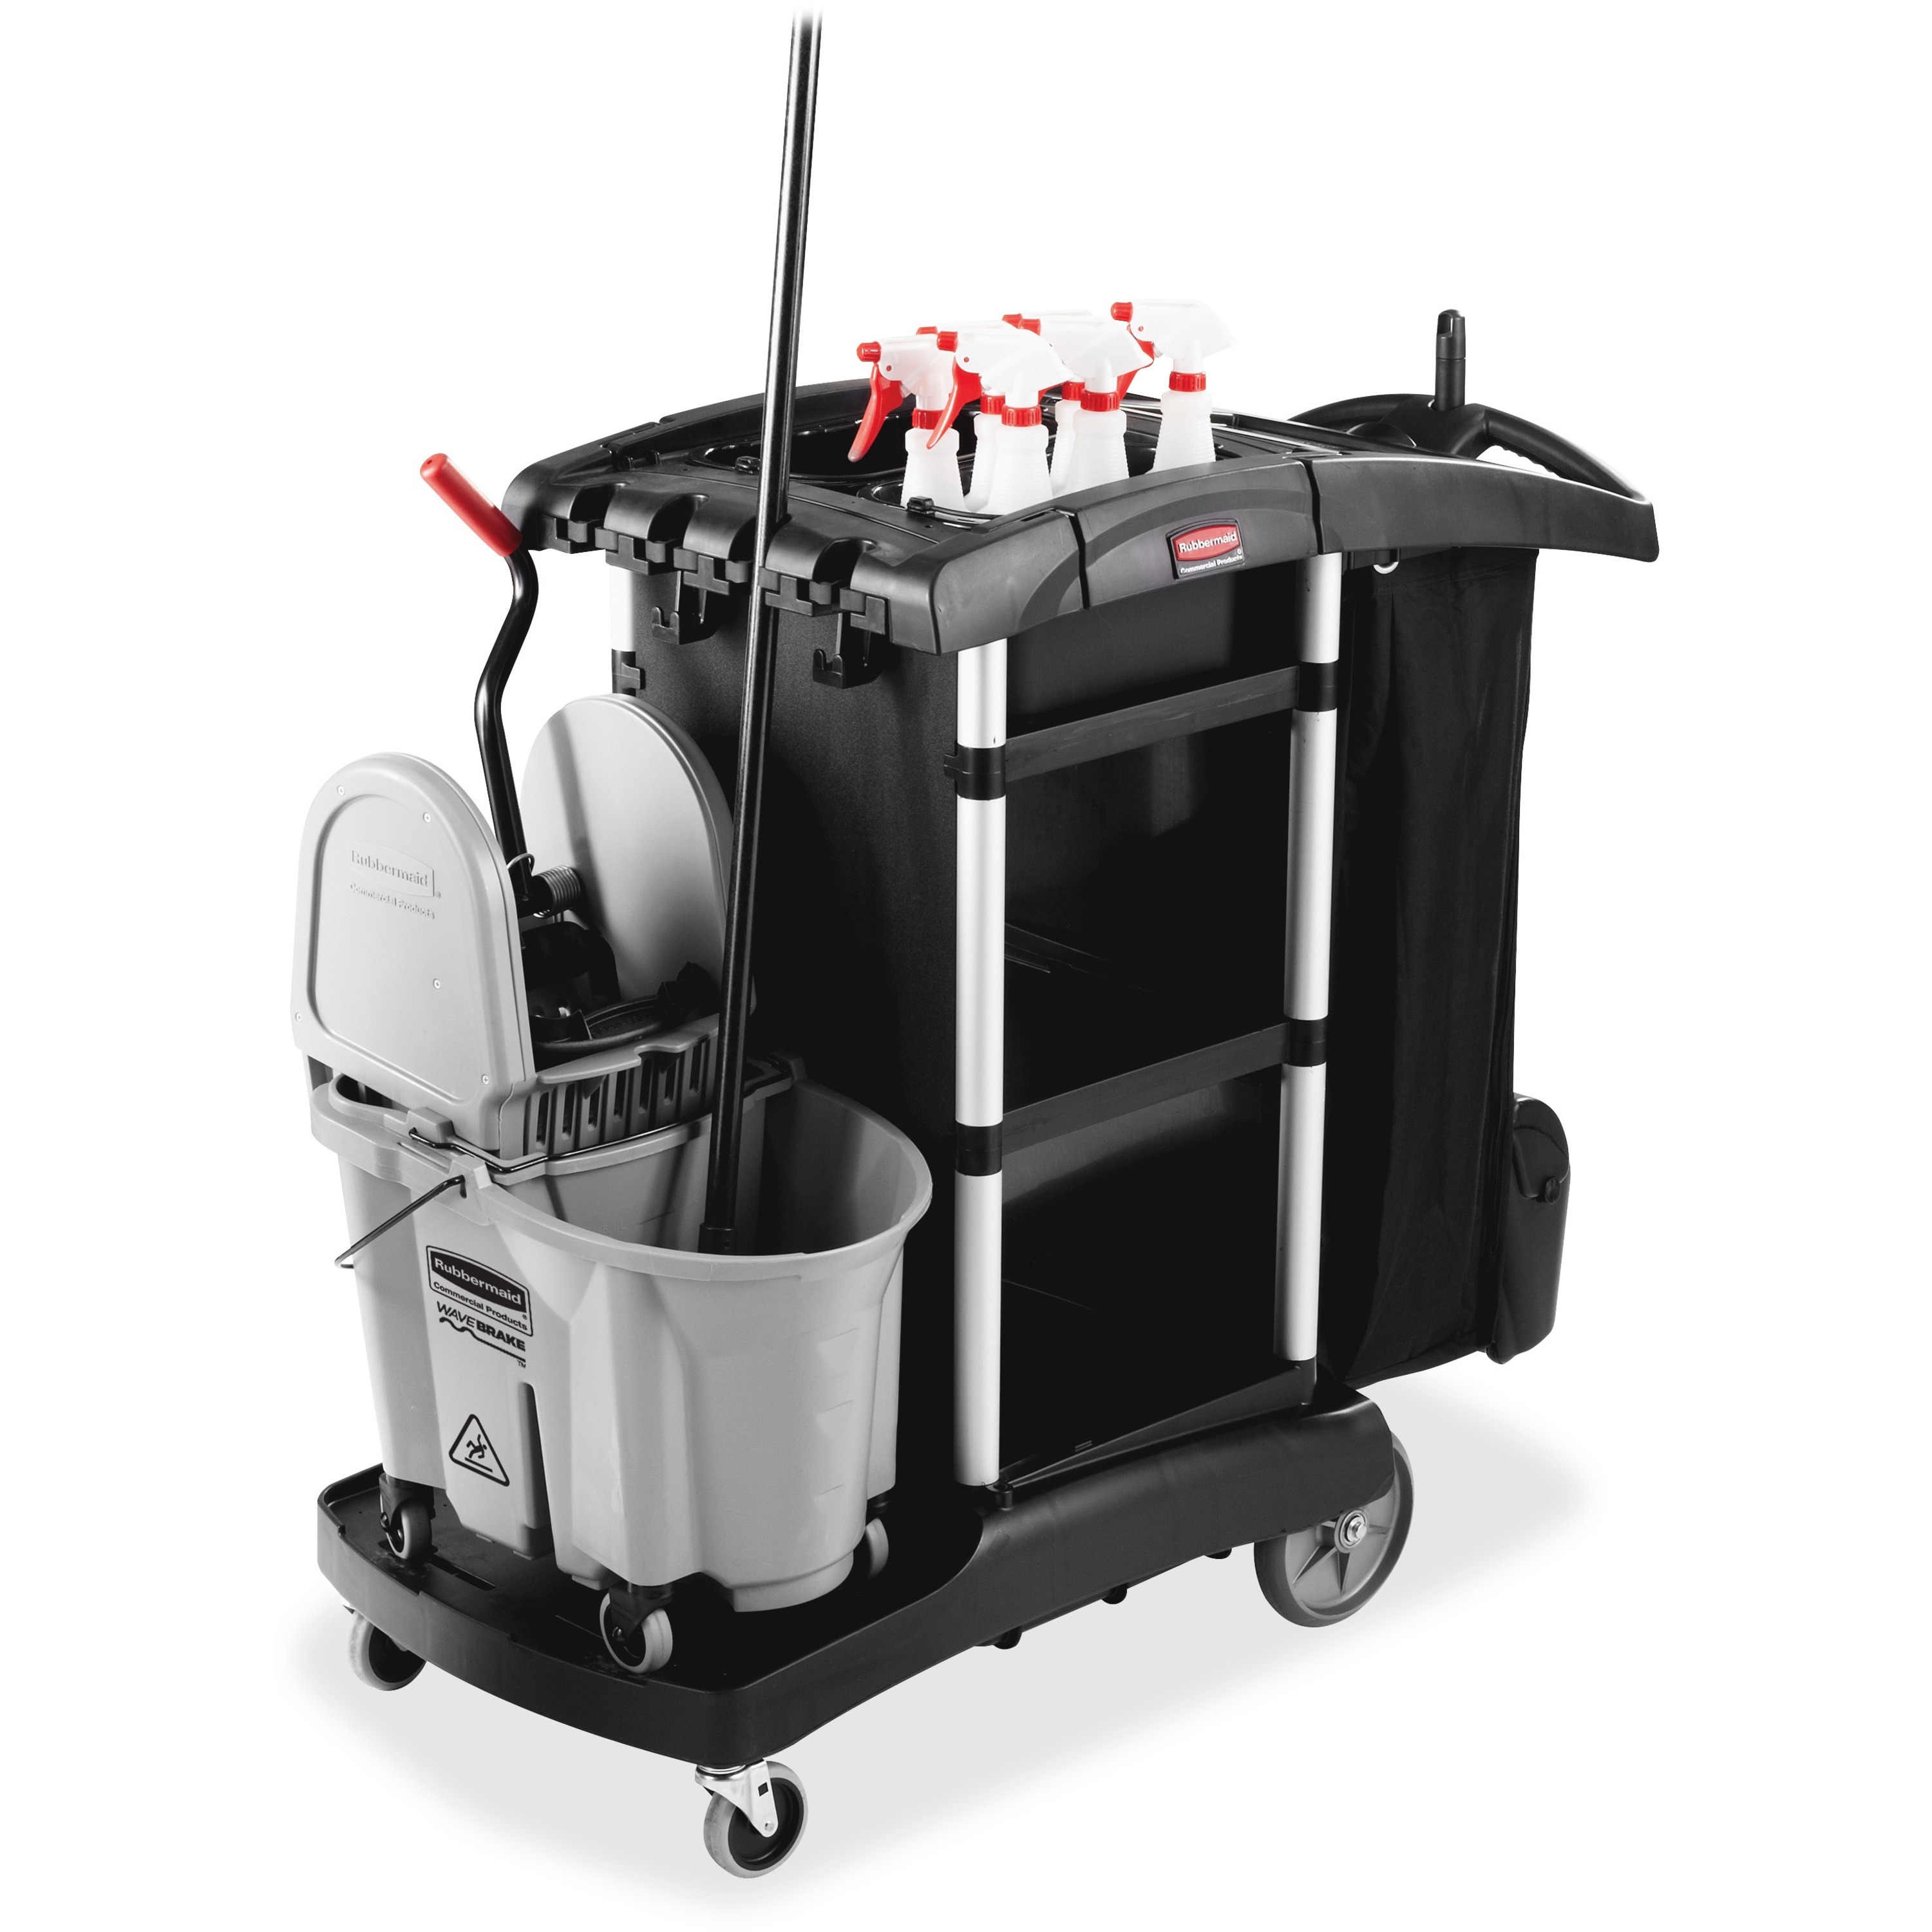 Rubbermaid Commercial High Capacity Executive Cleaning Cart